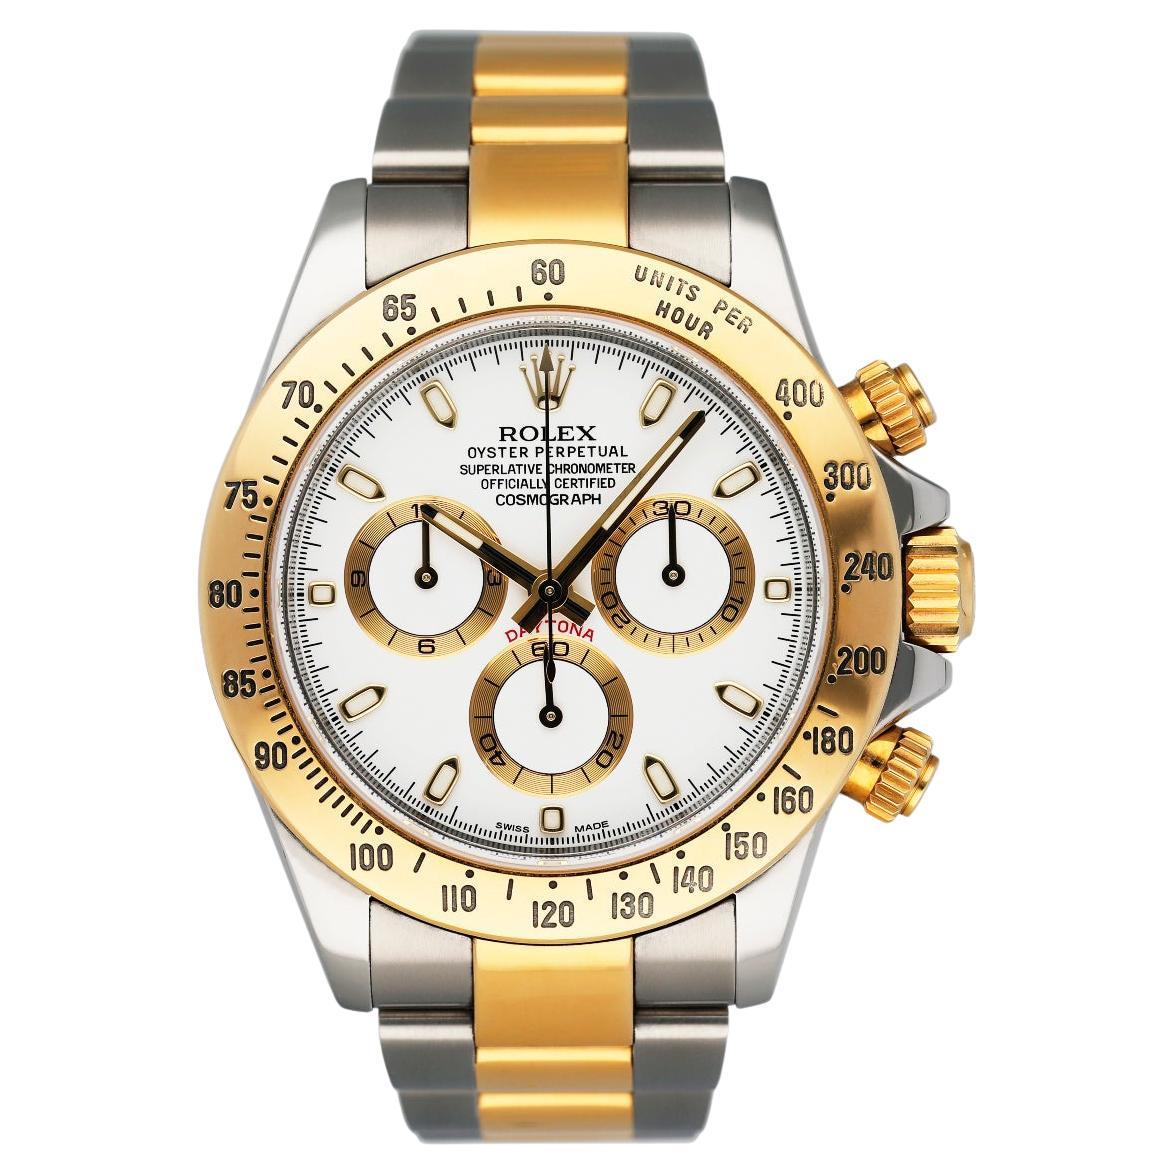 Rolex Daytona 16523 Two Tone Champagne Dial Watch at 1stDibs